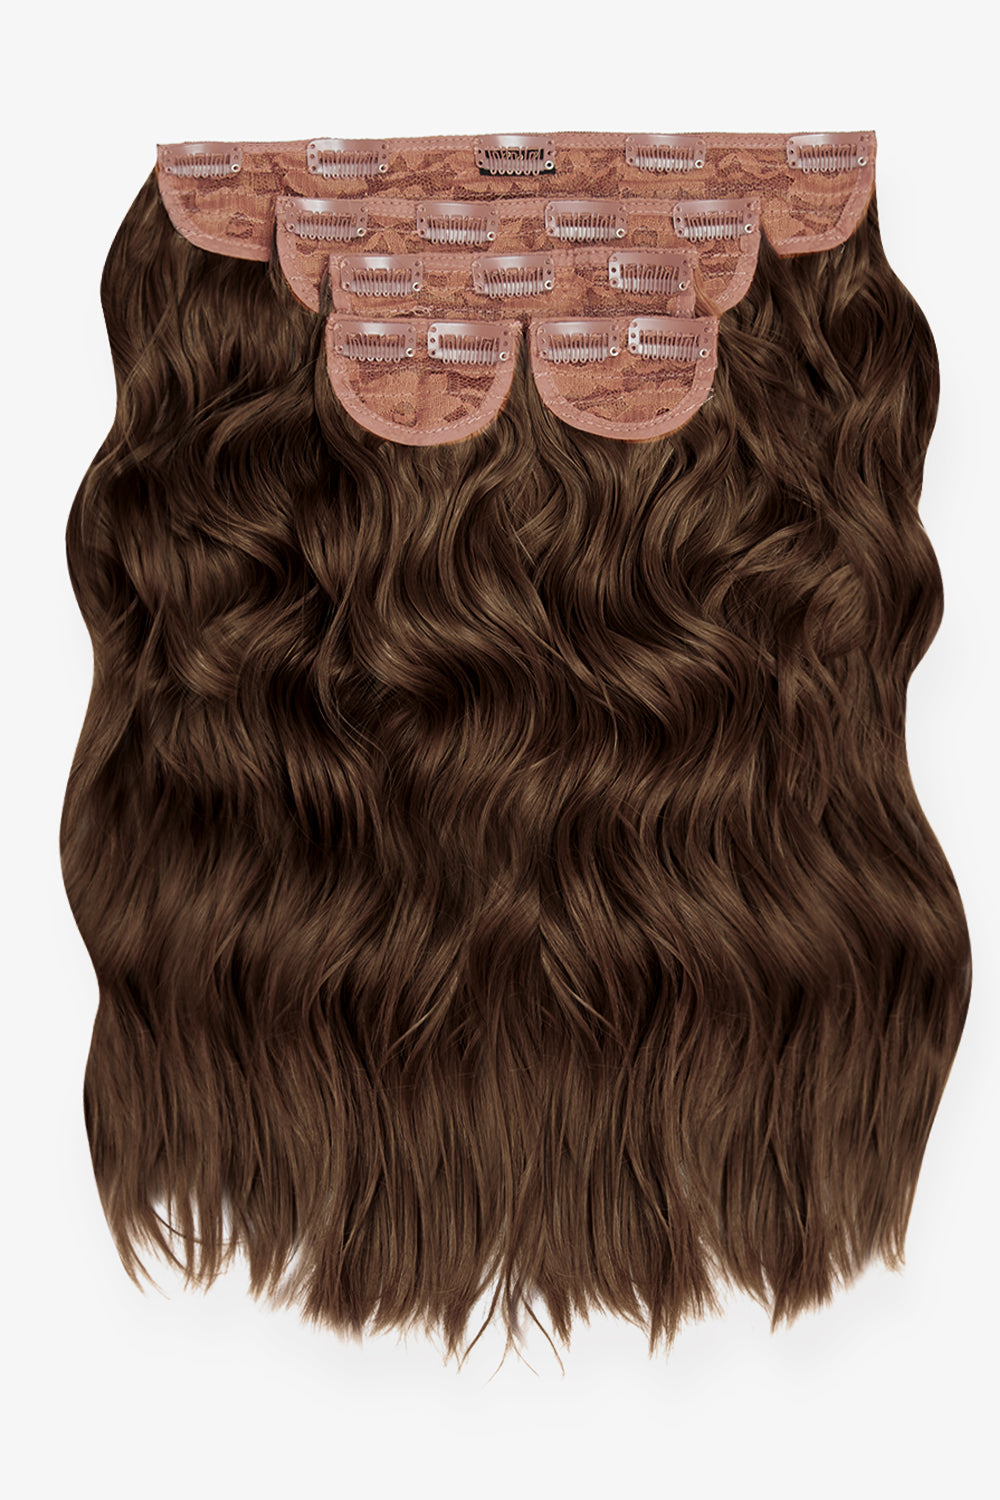 Super Thick 16’’ 5 Piece Brushed Out Wave Clip In Hair Extensions + Hair Care Bundle - Chestnut